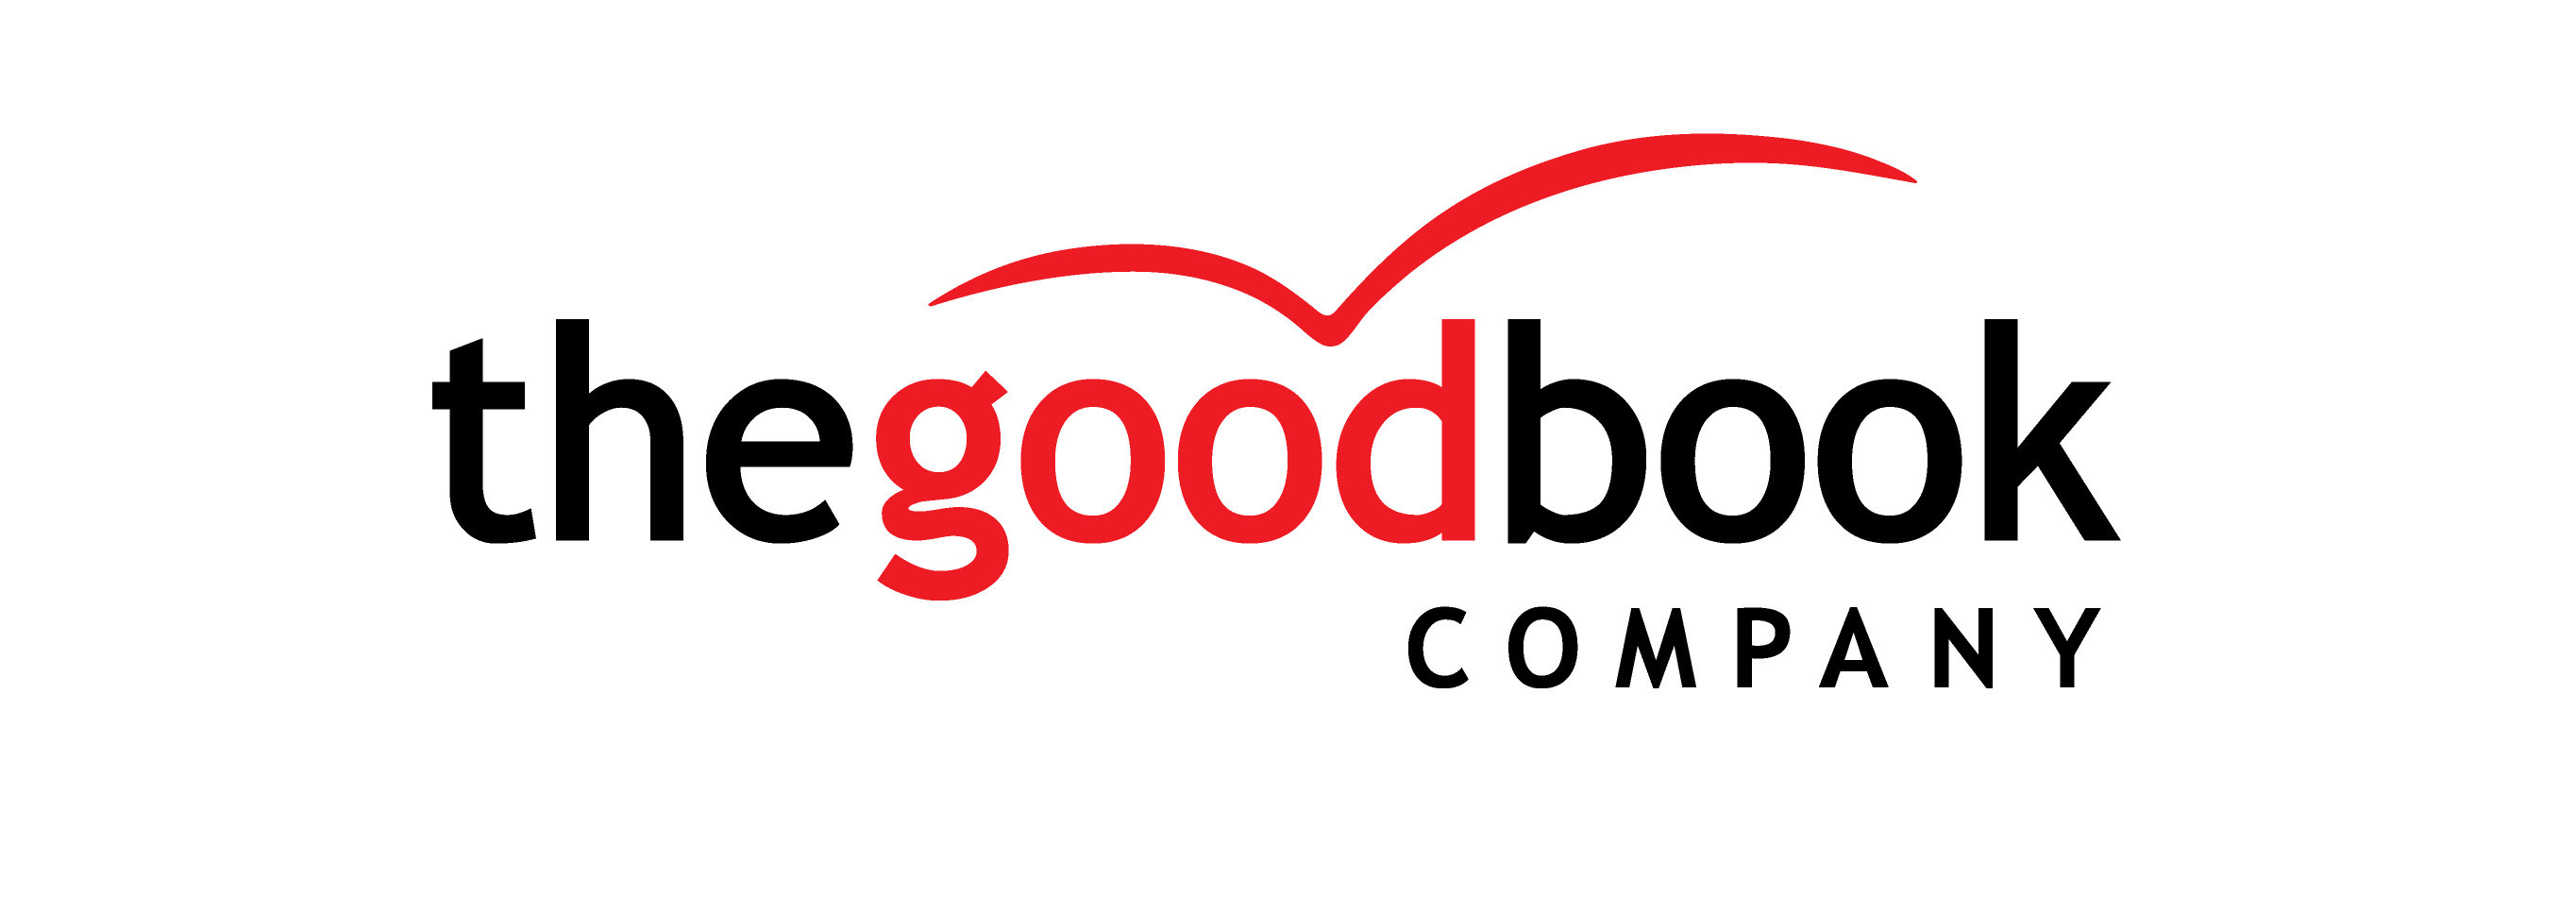 The Good Book Company North America Staff Update | The Good Book Blog